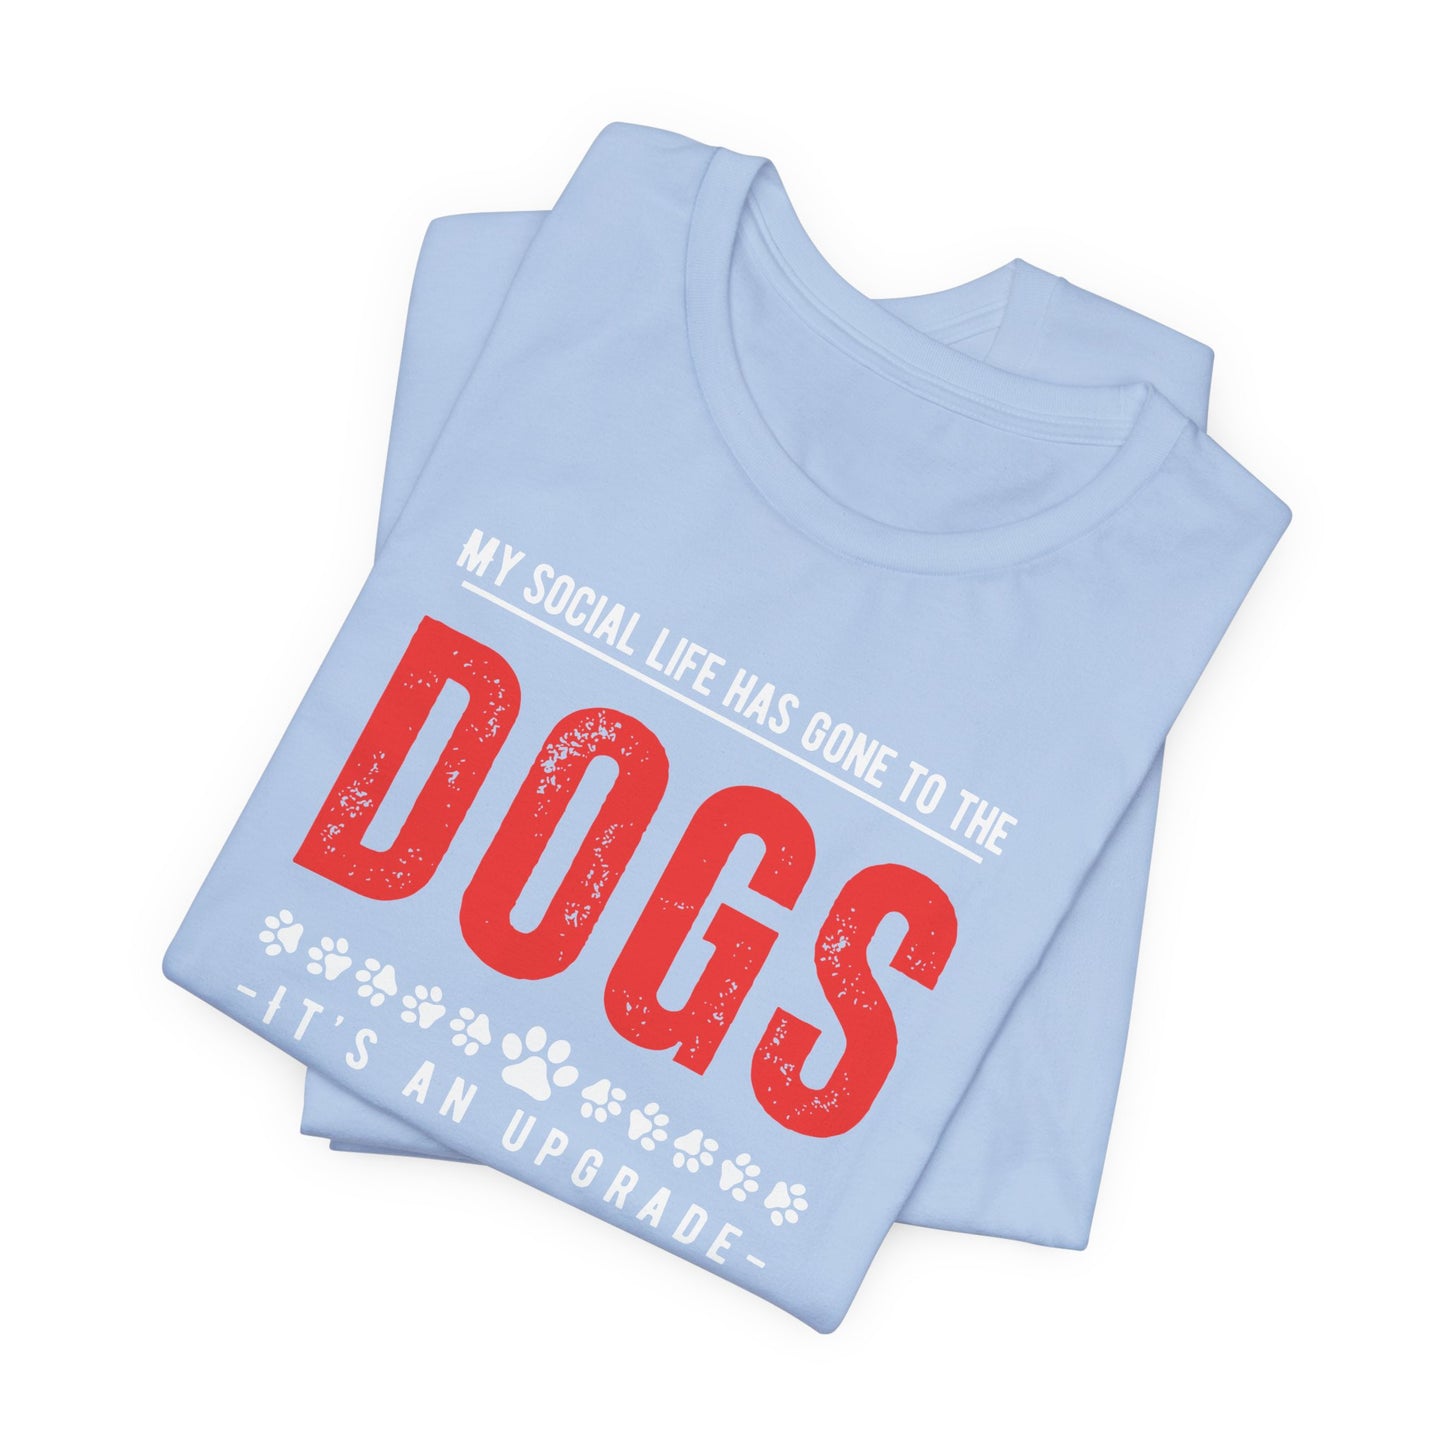 My Social Life Has Gone to the Dogs Bella Canvas 3001 Unisex Tee